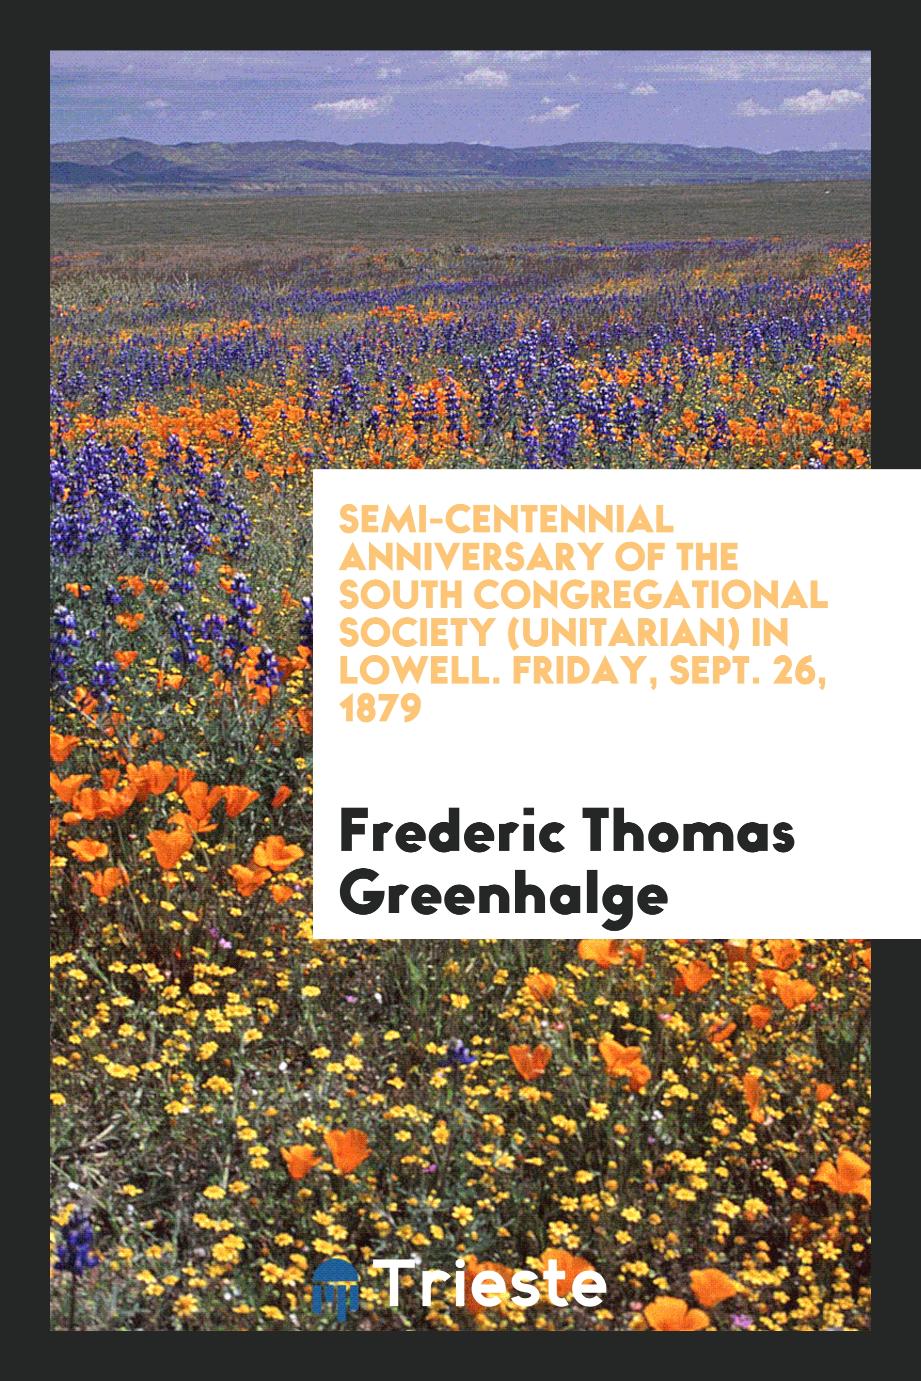 Semi-Centennial Anniversary of the South Congregational Society (Unitarian) in Lowell. Friday, Sept. 26, 1879